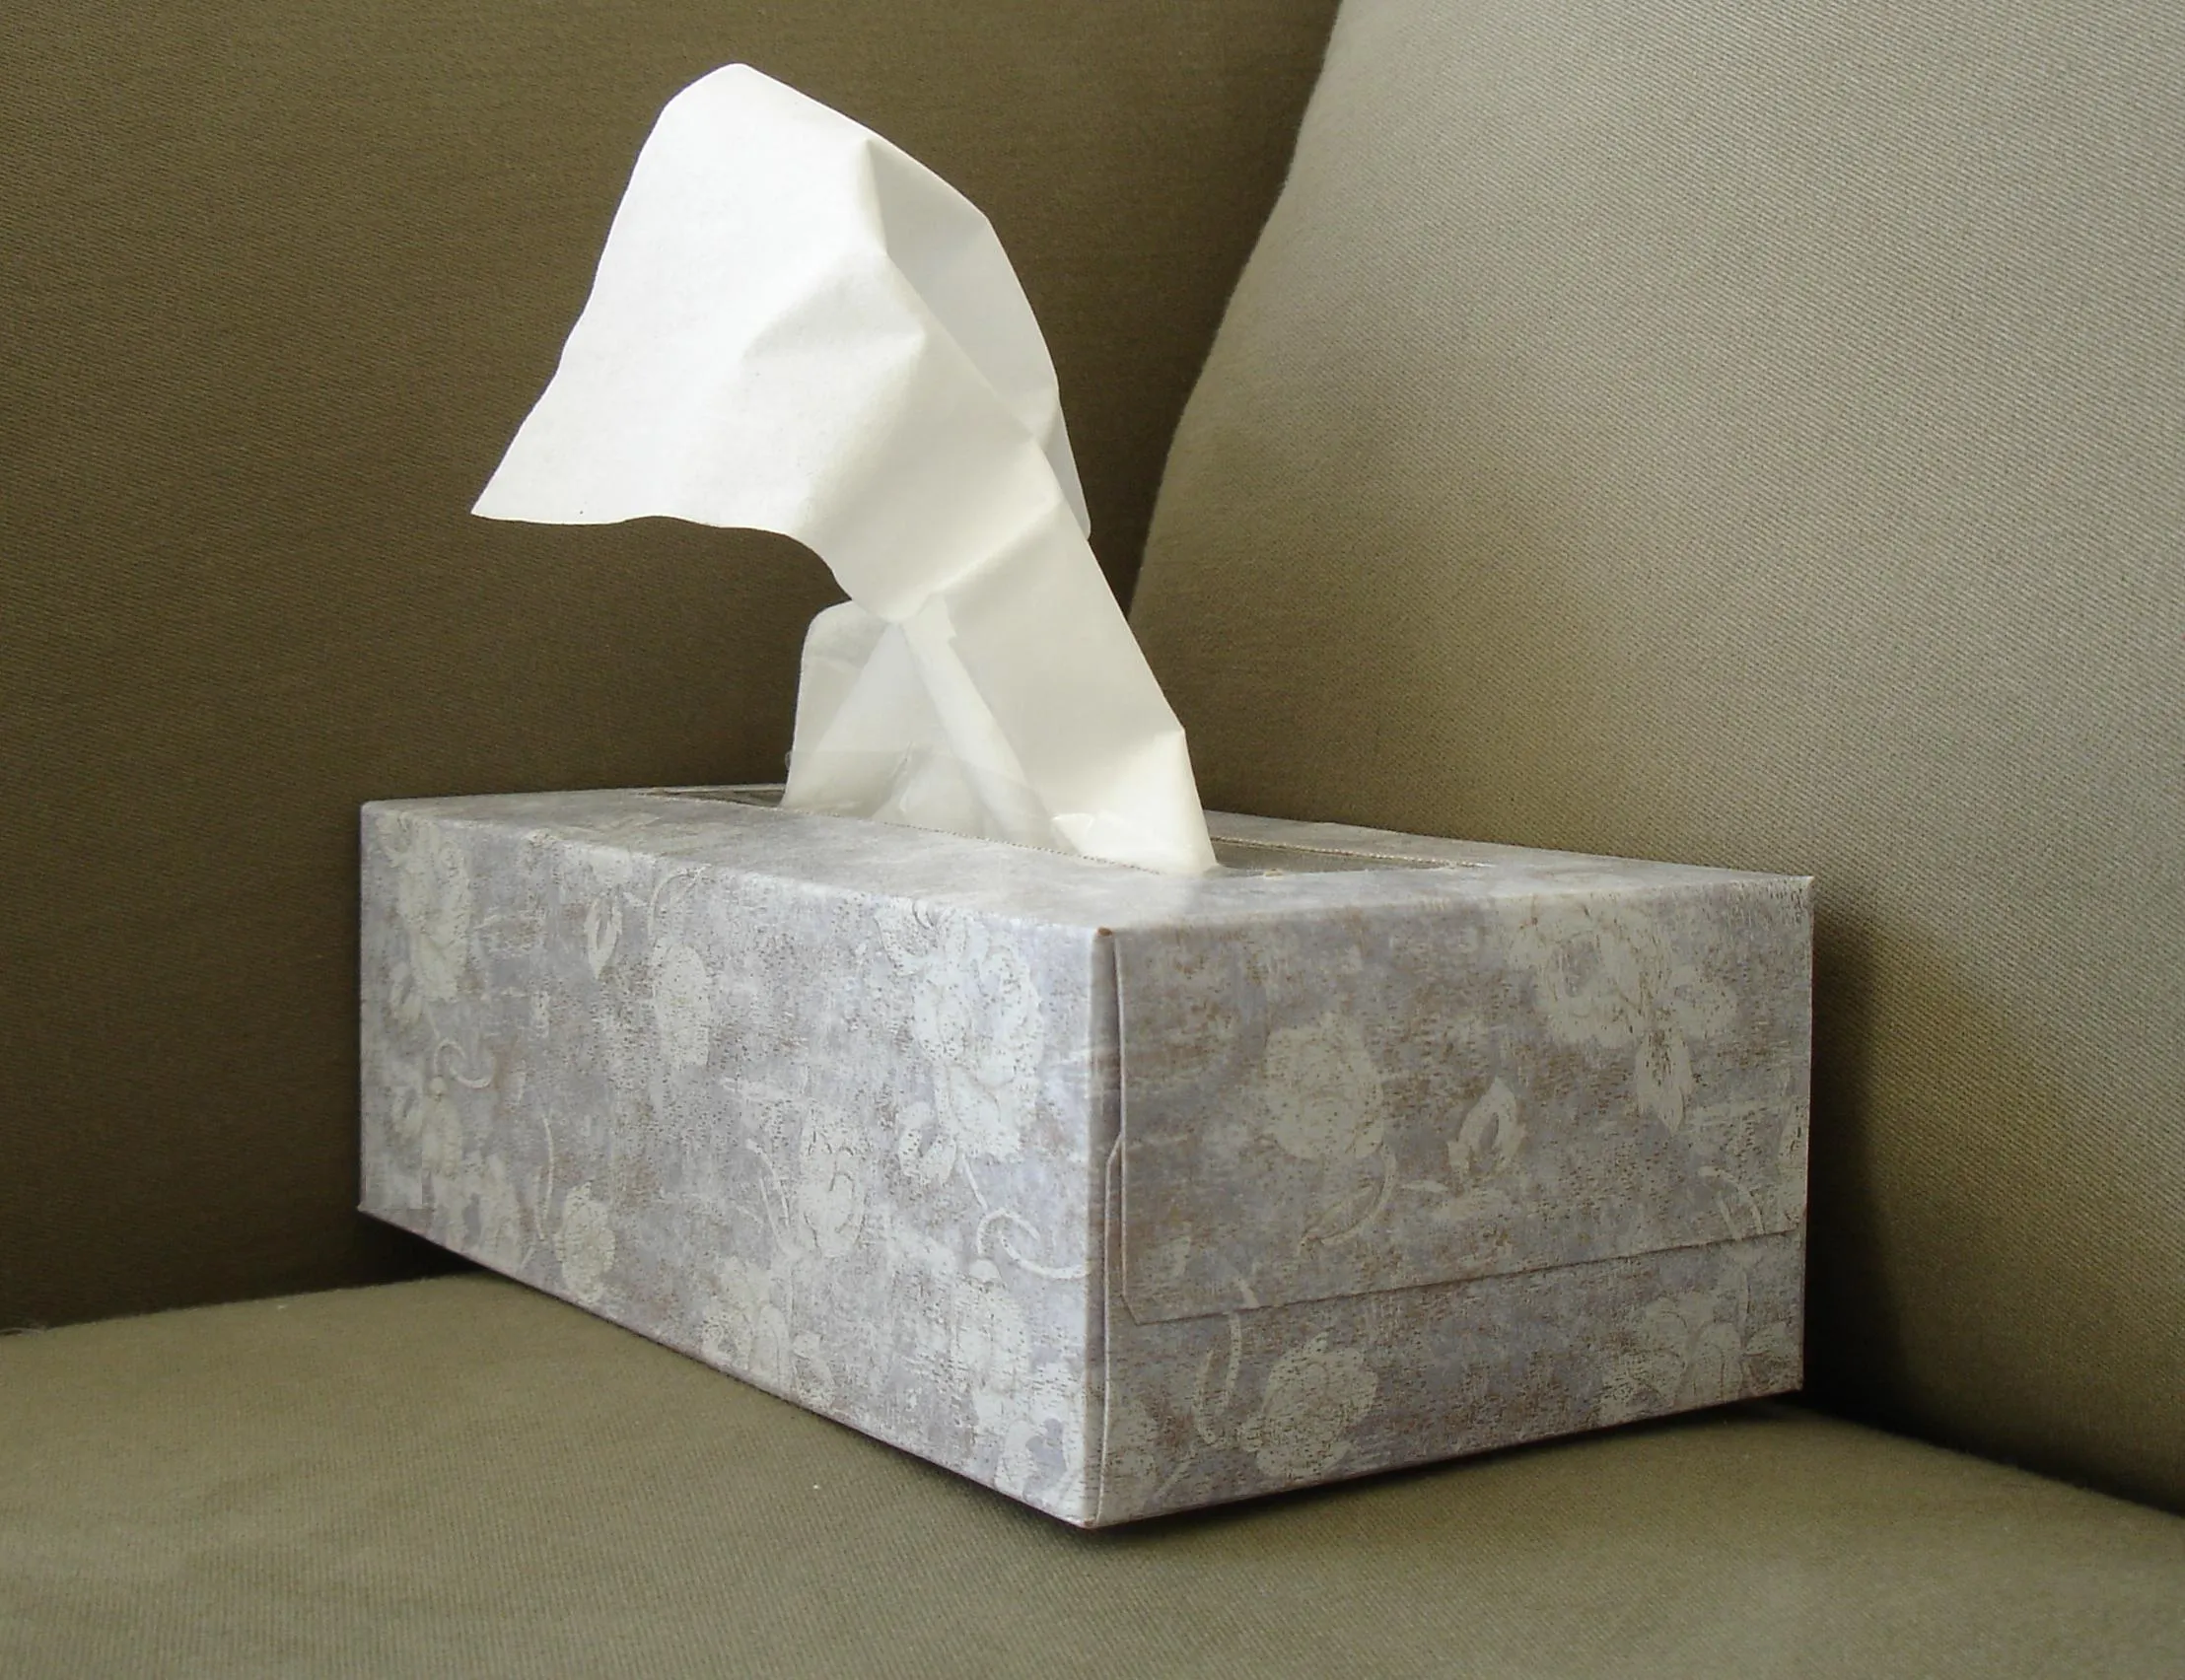 Tissues are another must-have item for your guest bathroom.